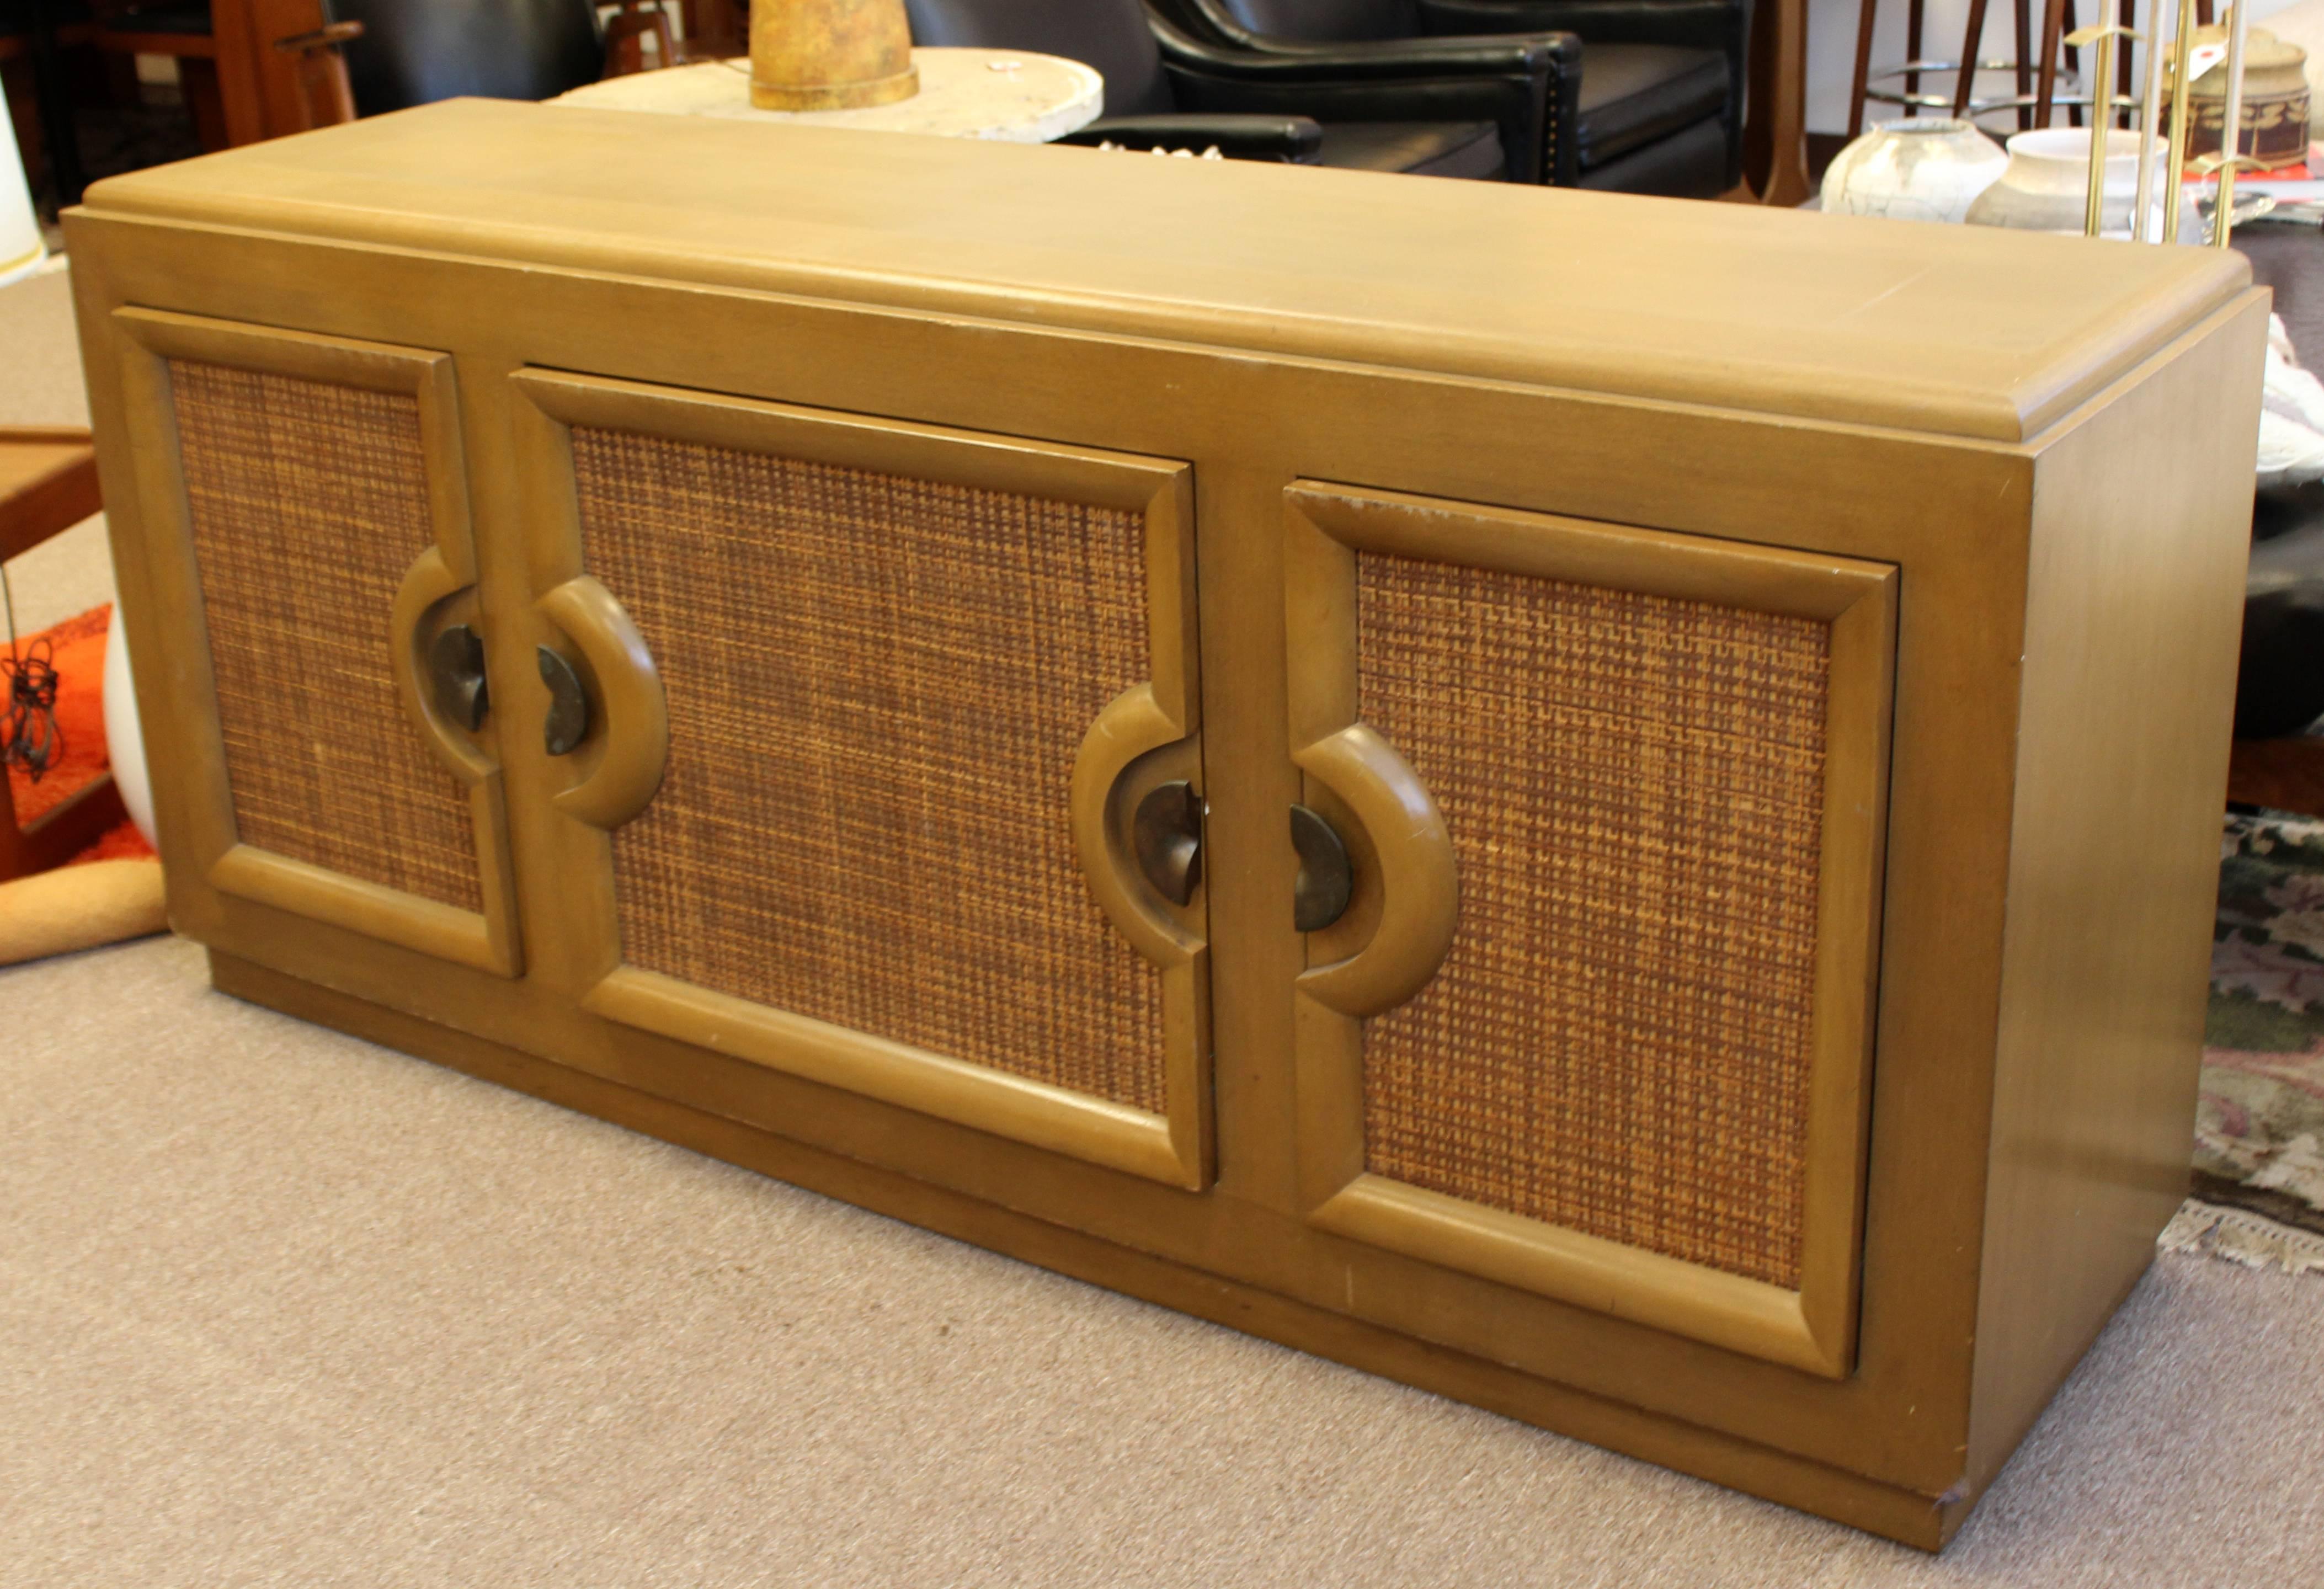 American Mid-Century Modern Paul Laszlo Credenza Sideboard Buffet Cane and Wood, 1950s